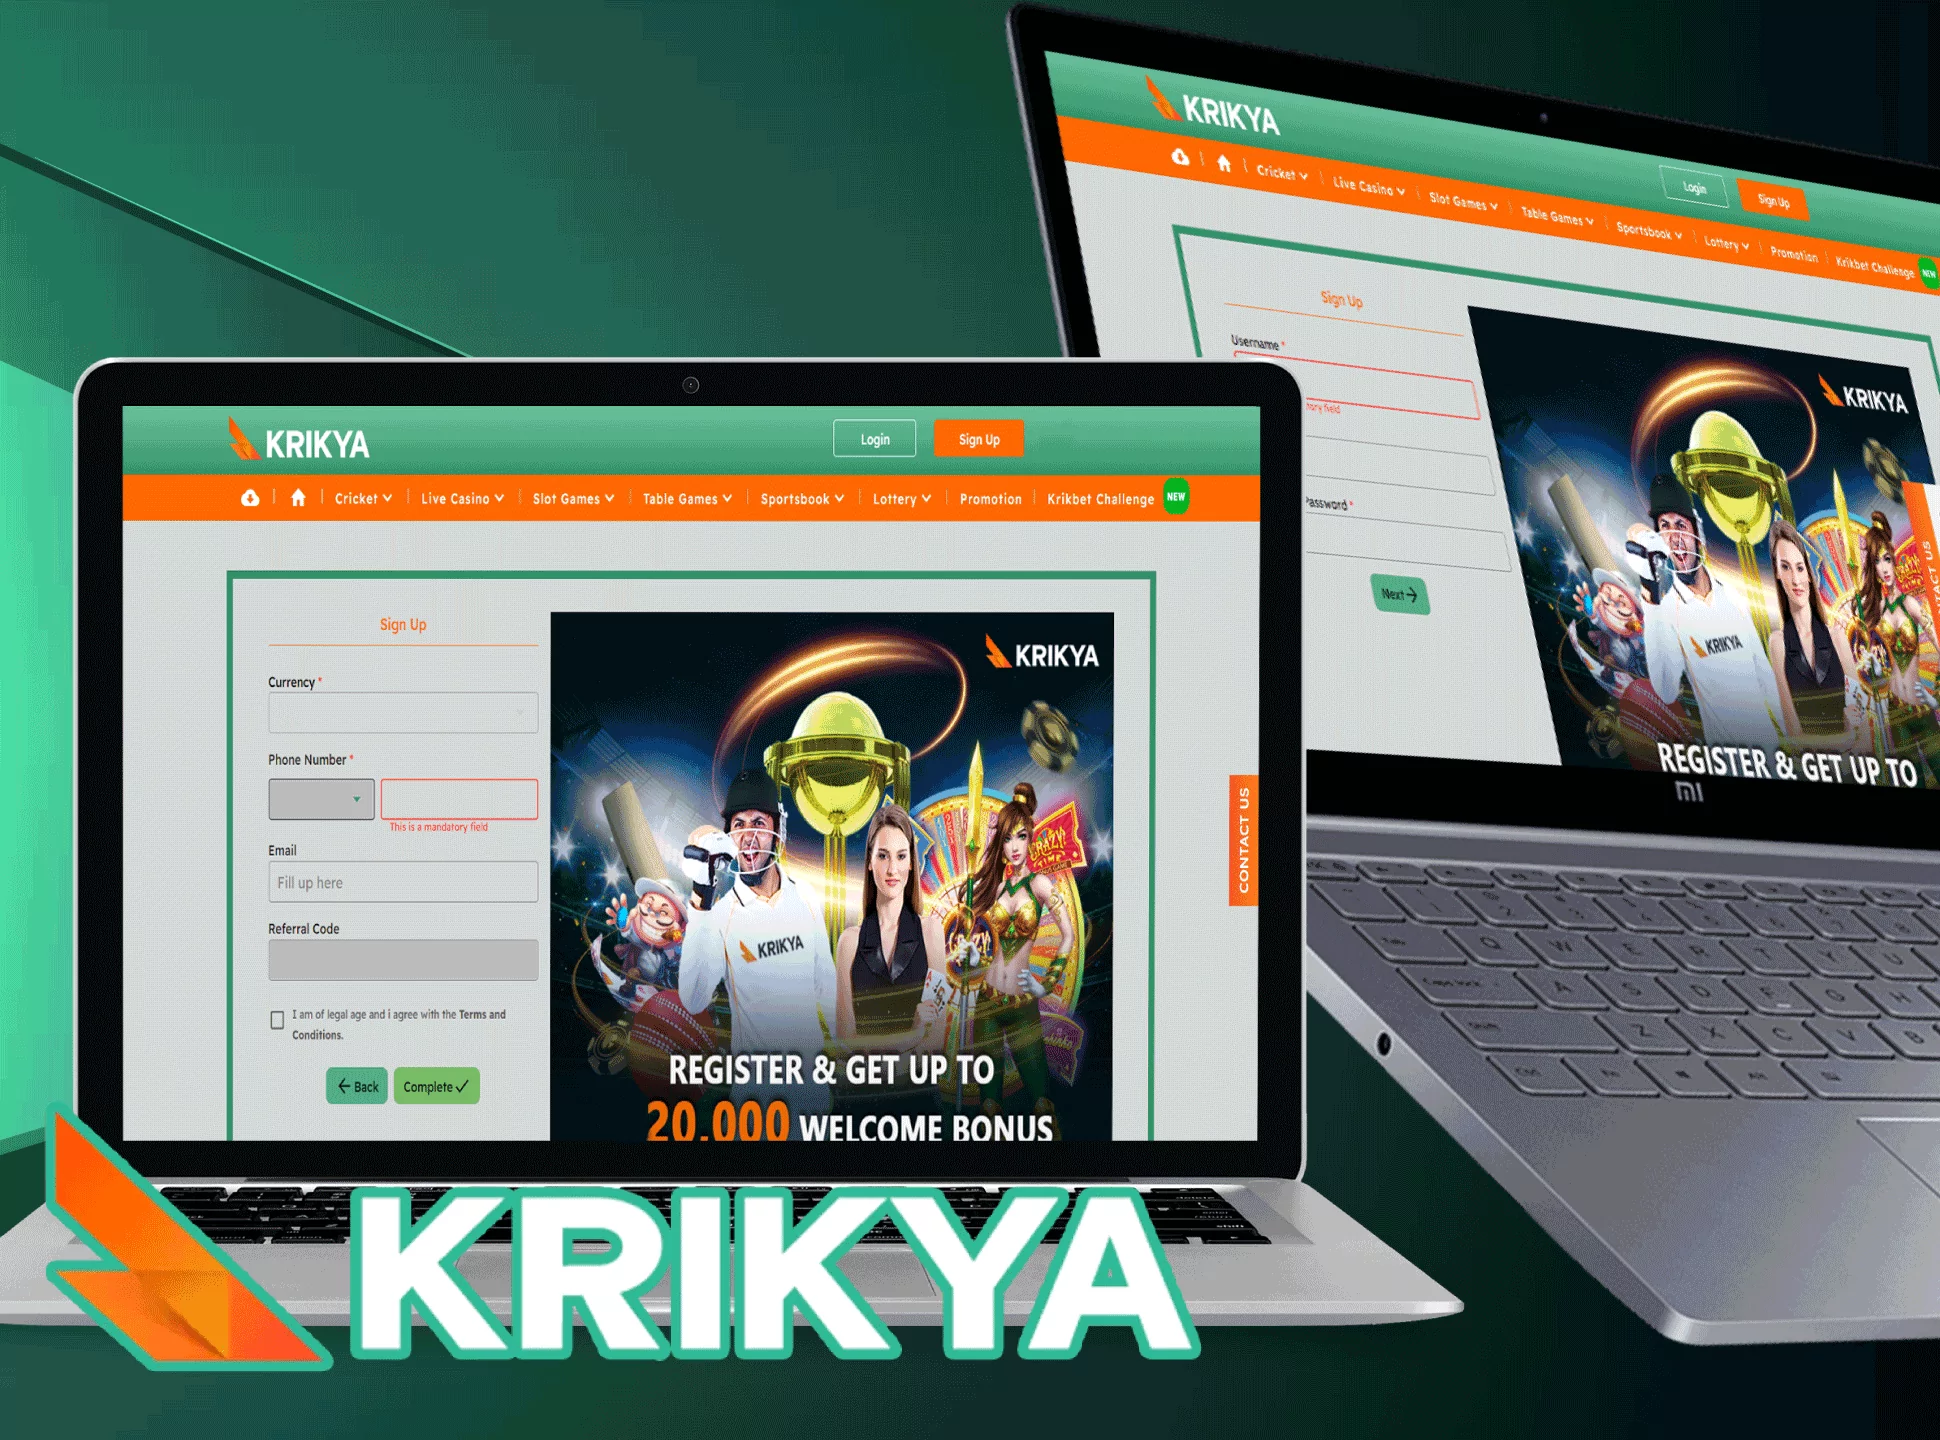 Go to the Krikya official website and create your own account.